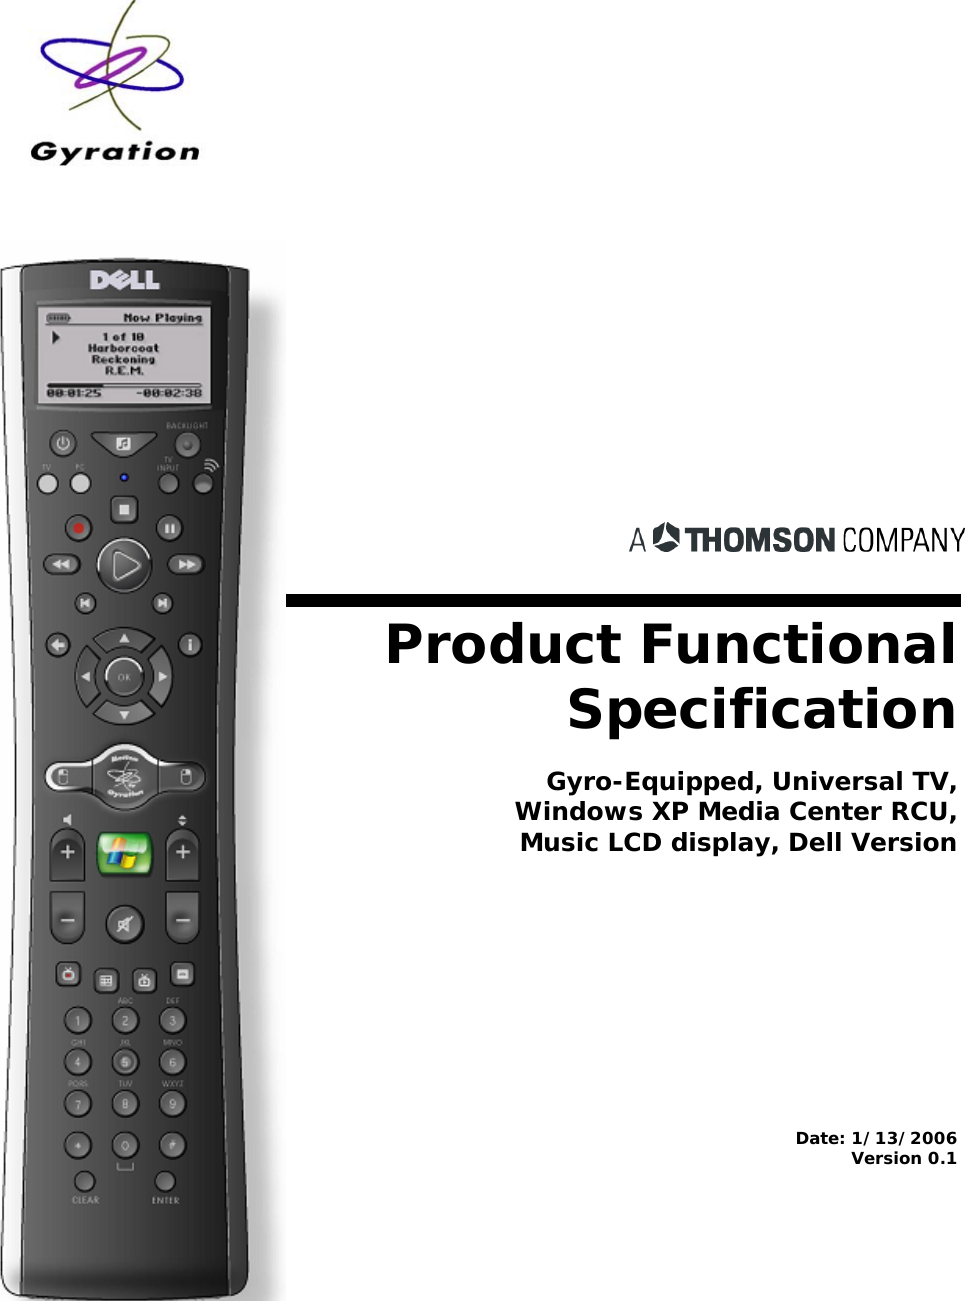   Product Functional Specification  Gyro-Equipped, Universal TV, Windows XP Media Center RCU, Music LCD display, Dell Version    Date: 1/13/2006 Version 0.1  